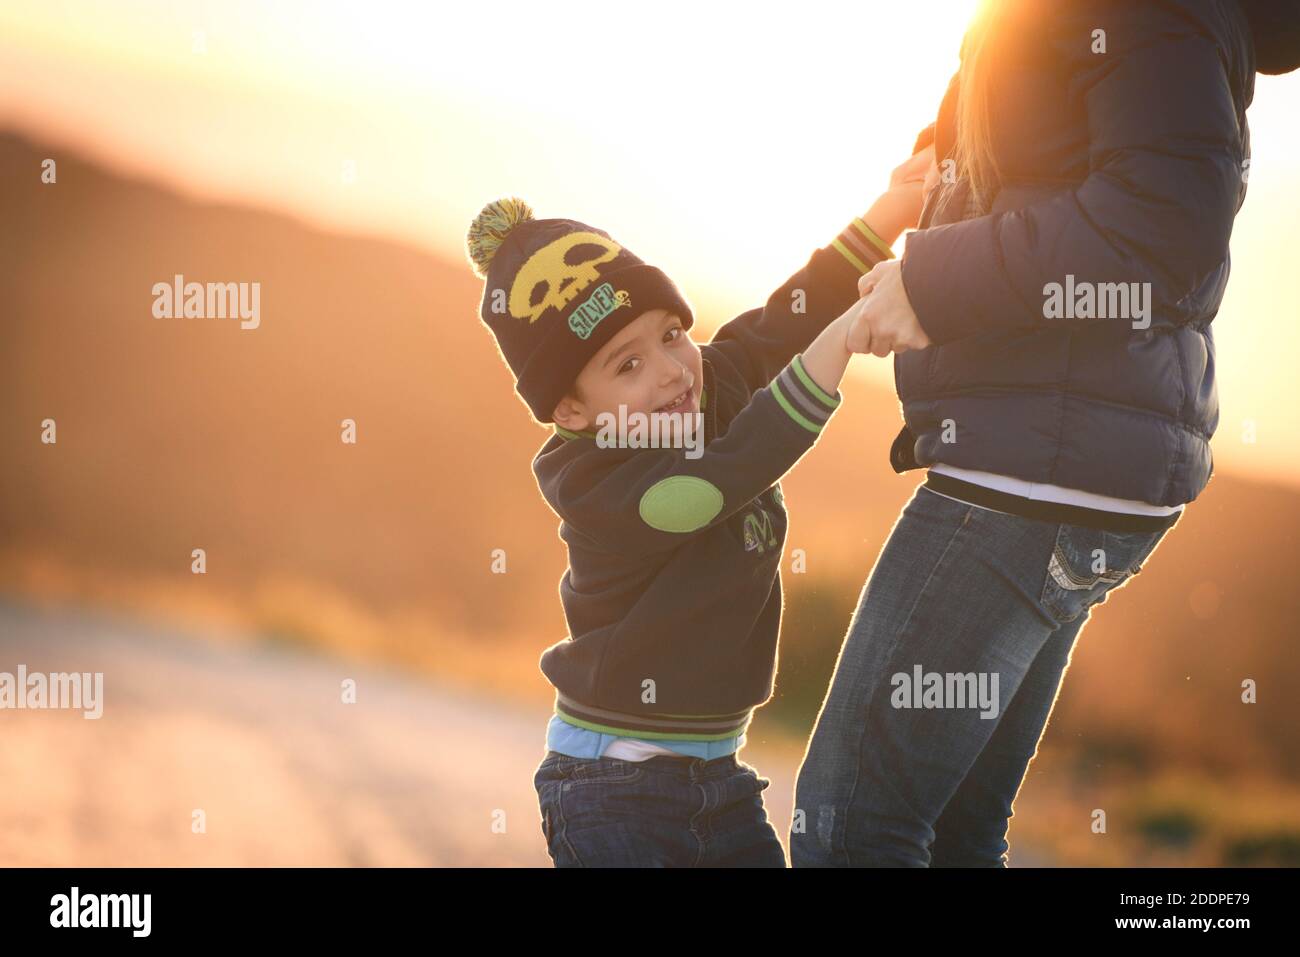 Happy family: mother, son playing in nature at sunset Stock Photo